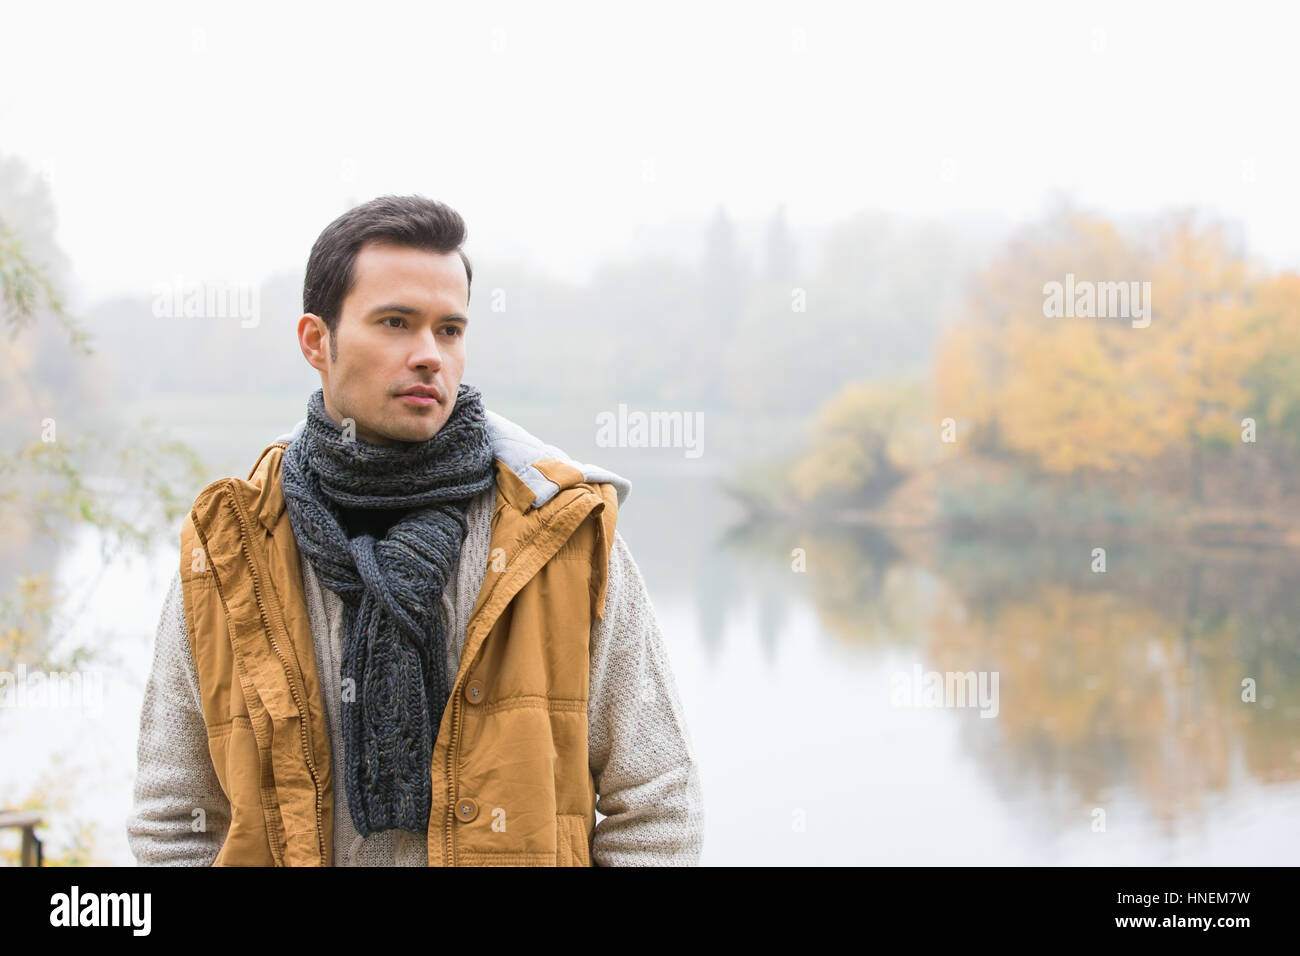 Thoughtful young man in warm clothing standing against lake Stock Photo